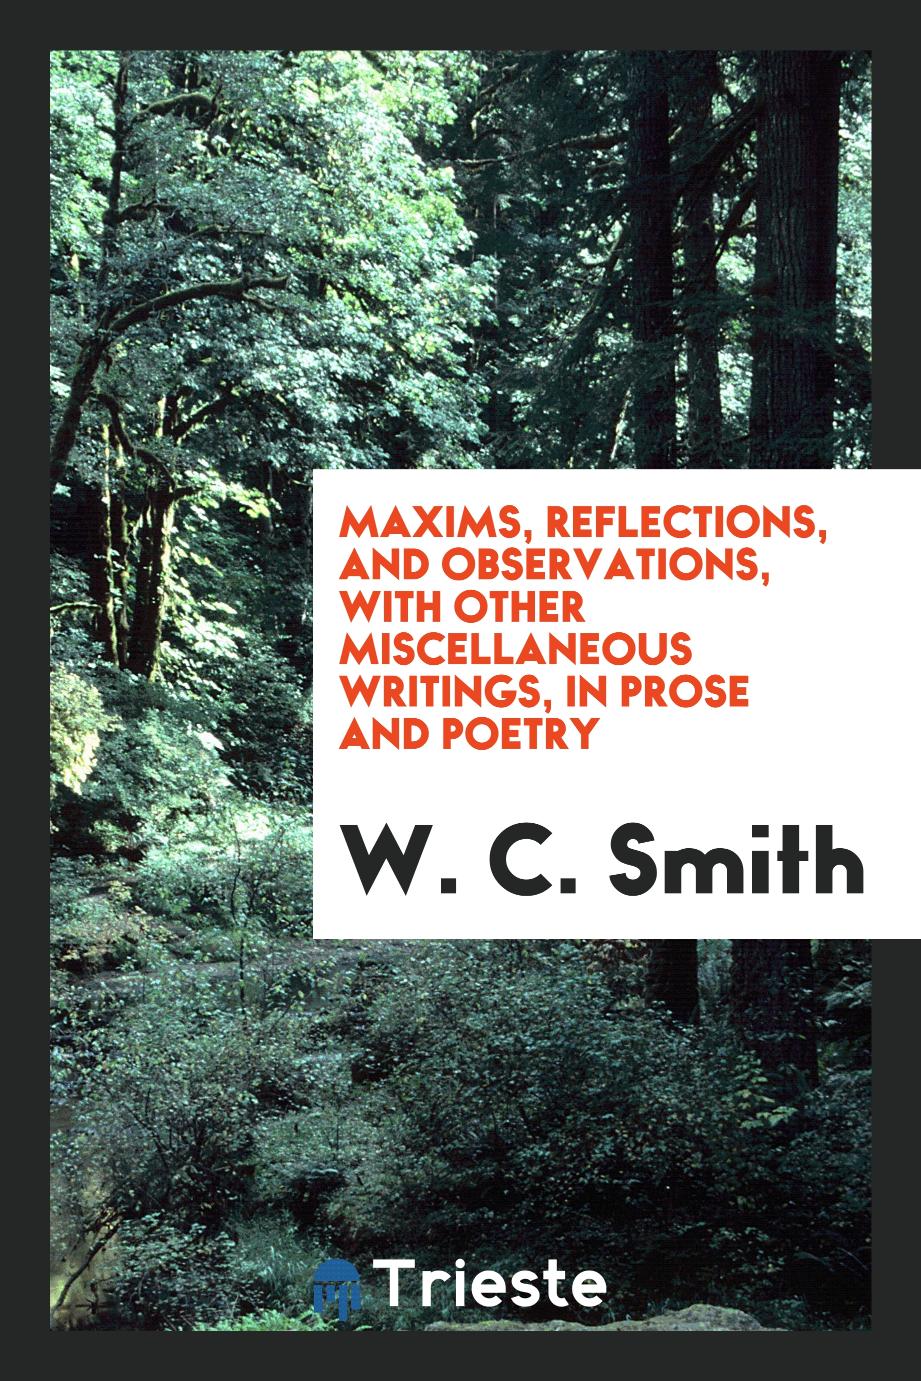 Maxims, reflections, and observations, with other miscellaneous writings, in prose and poetry